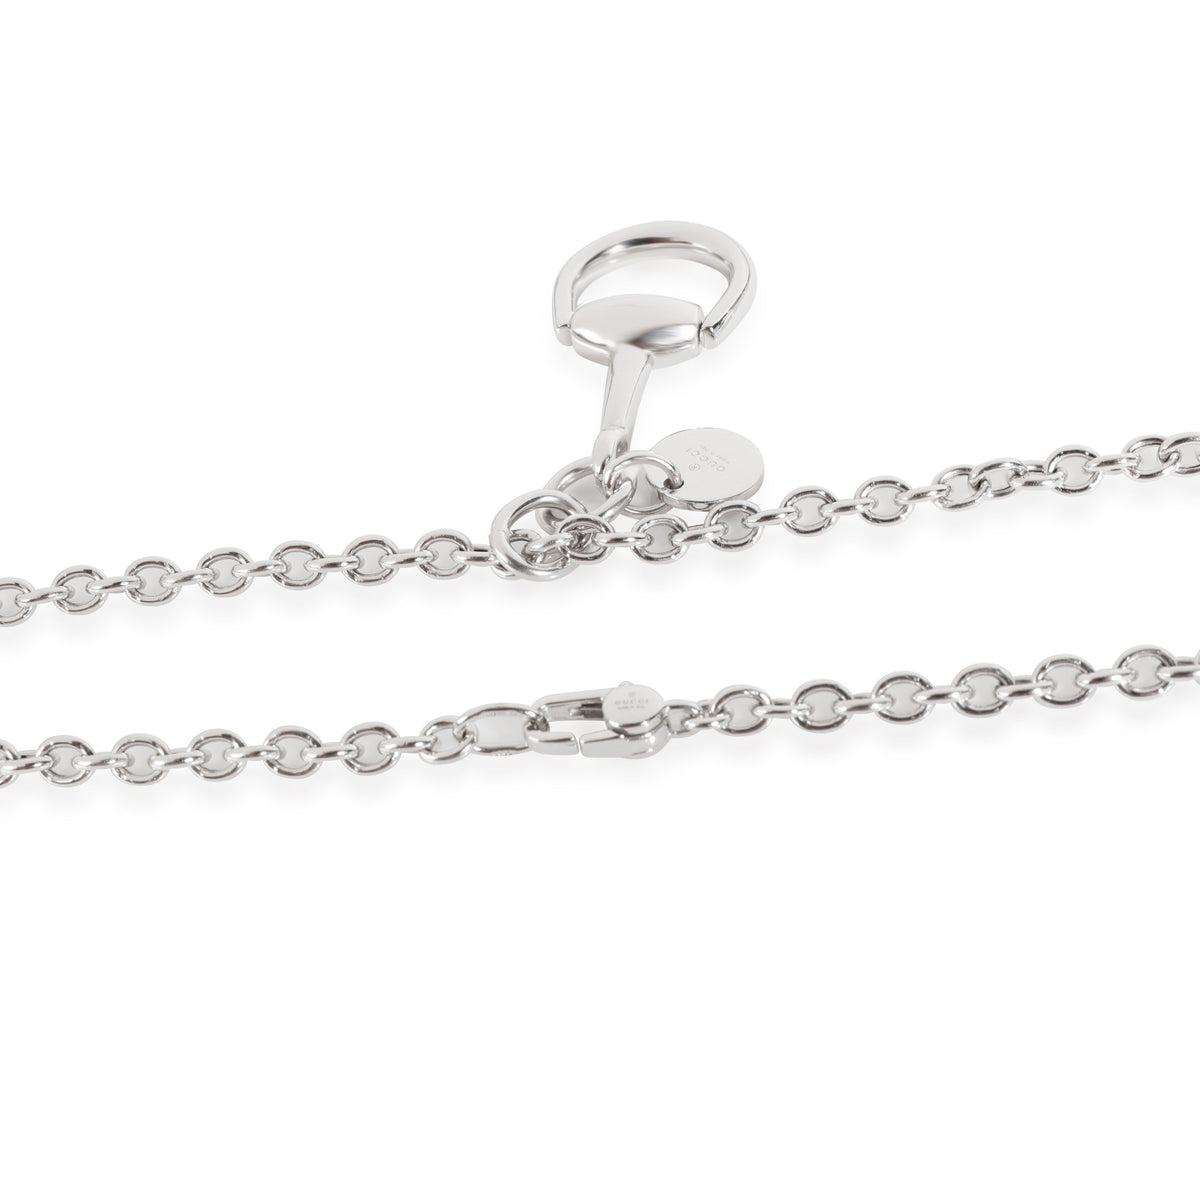 Gucci Horsebit Necklace in 18K White Gold